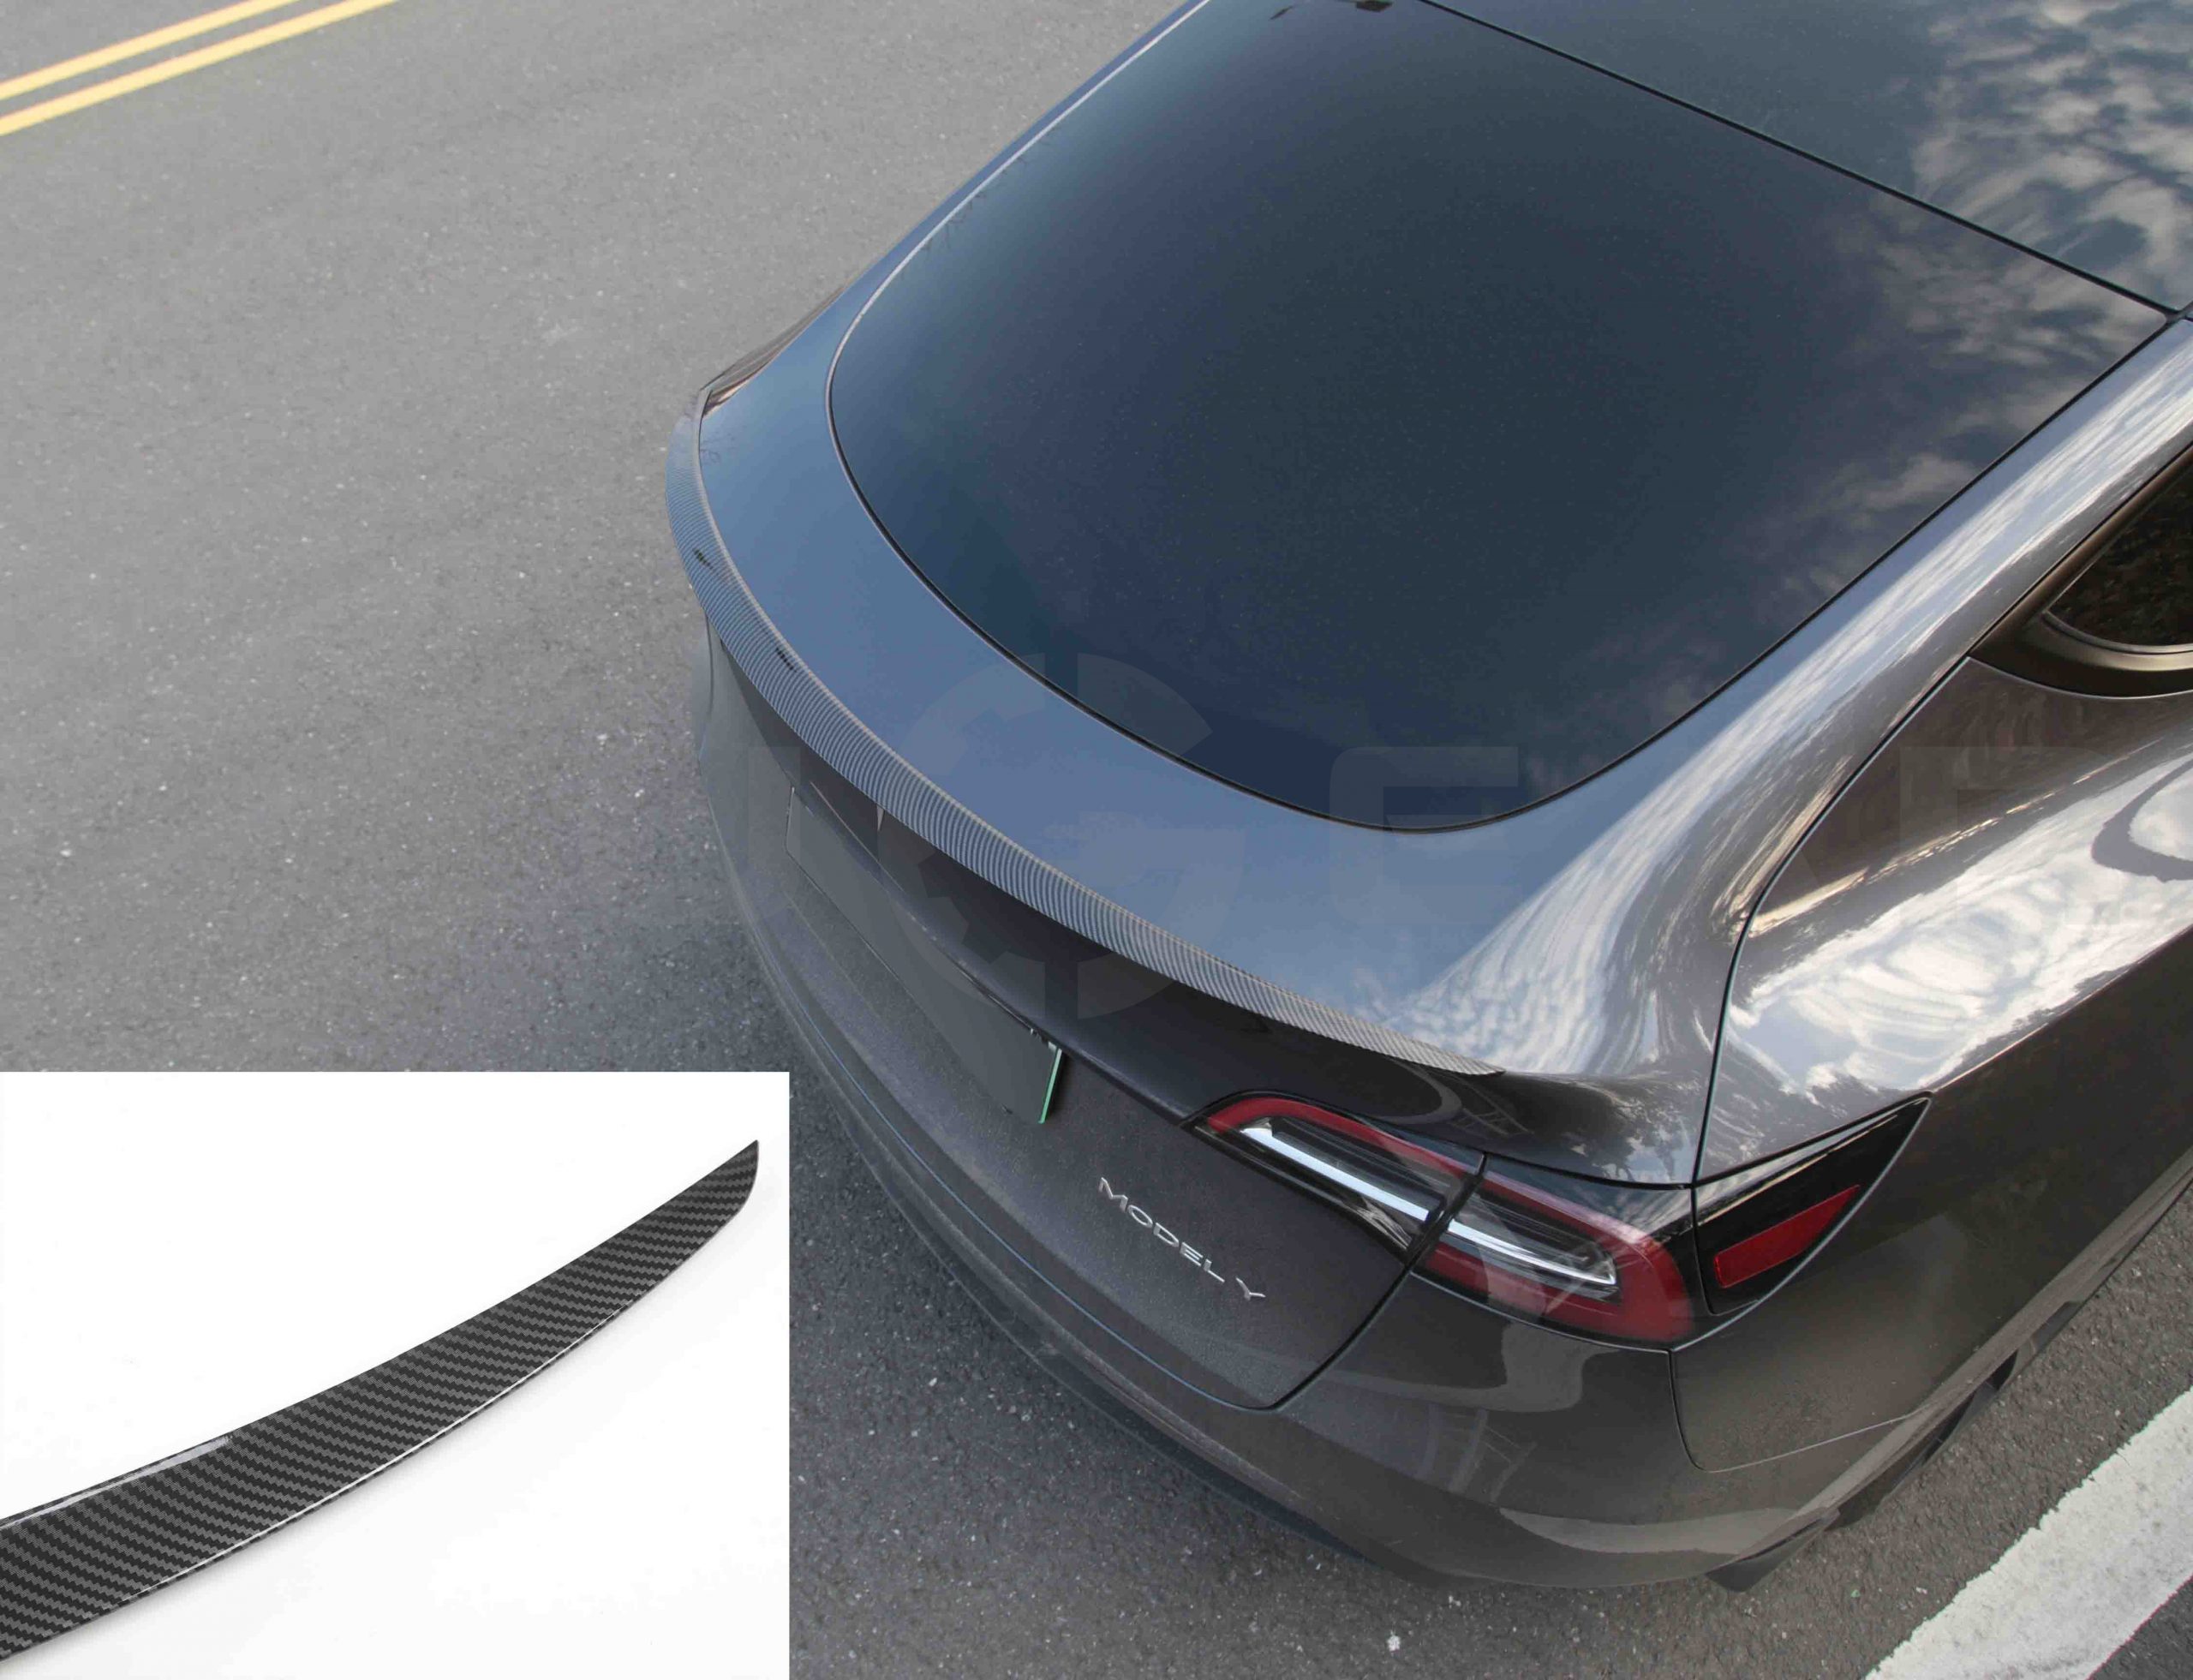 https://www.plugear.com/wp-content/uploads/2021/10/ty232_Tesla-Model-Y_Performance-Tail-Spoiler-ABS-Coating_8-scaled.jpg